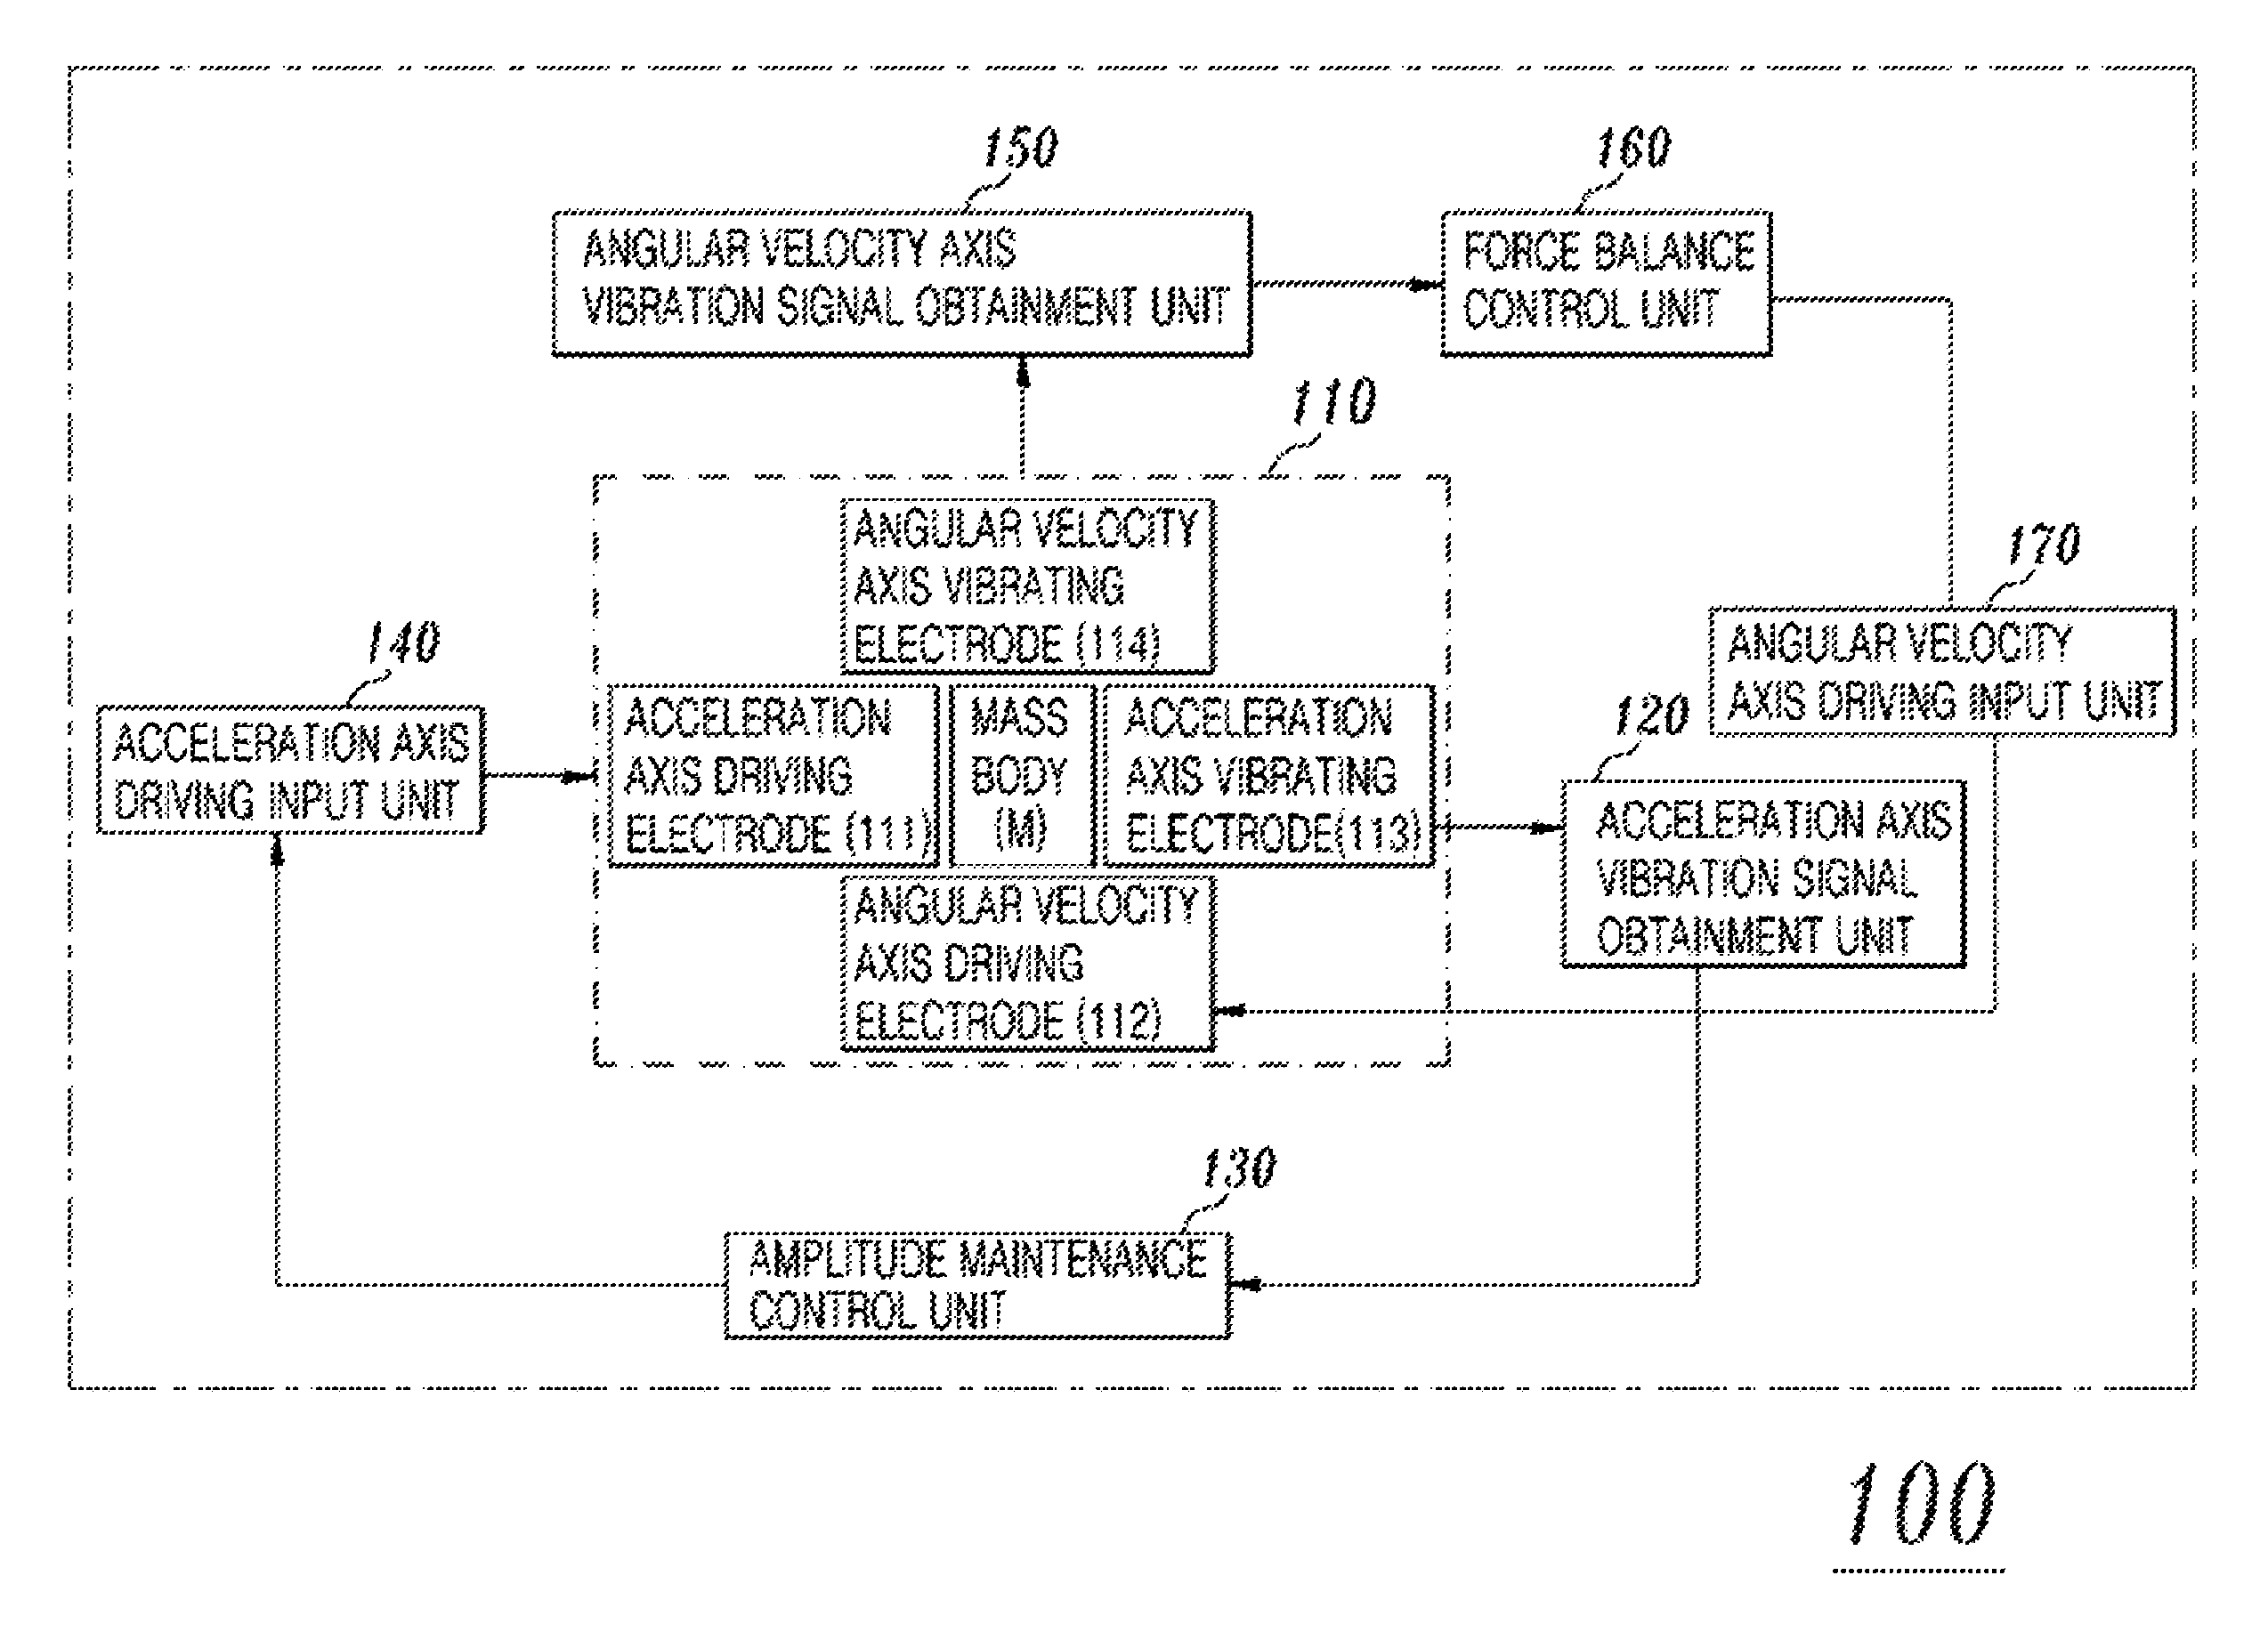 Combined accelerometer and gyroscope system